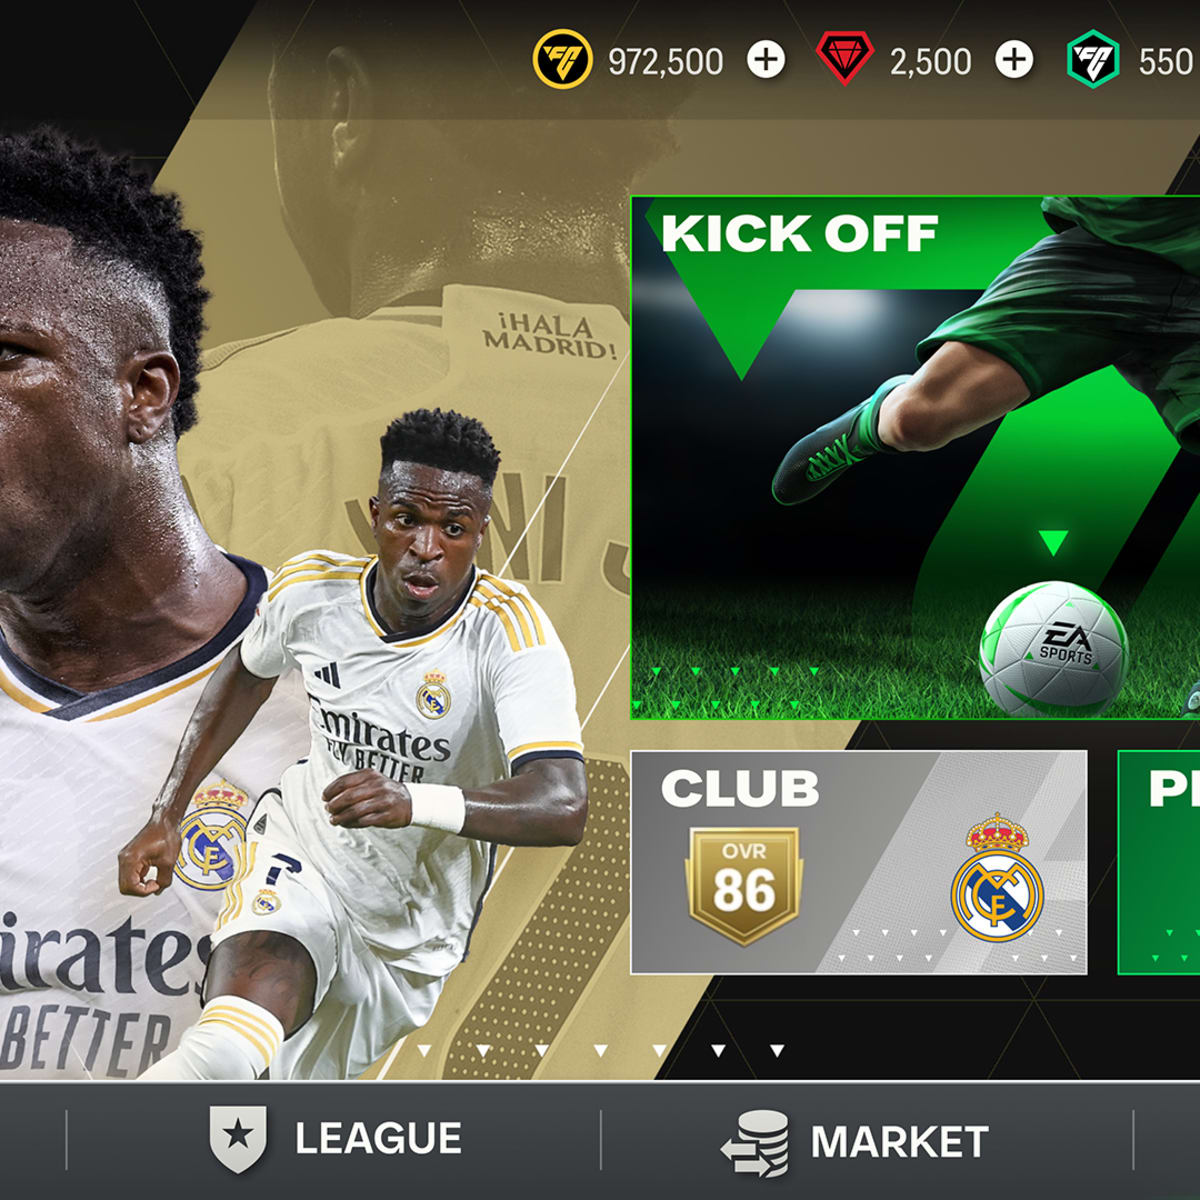 EA FC Mobile gameplay features: True Player Personality, Dynamic Game  Speed, and more